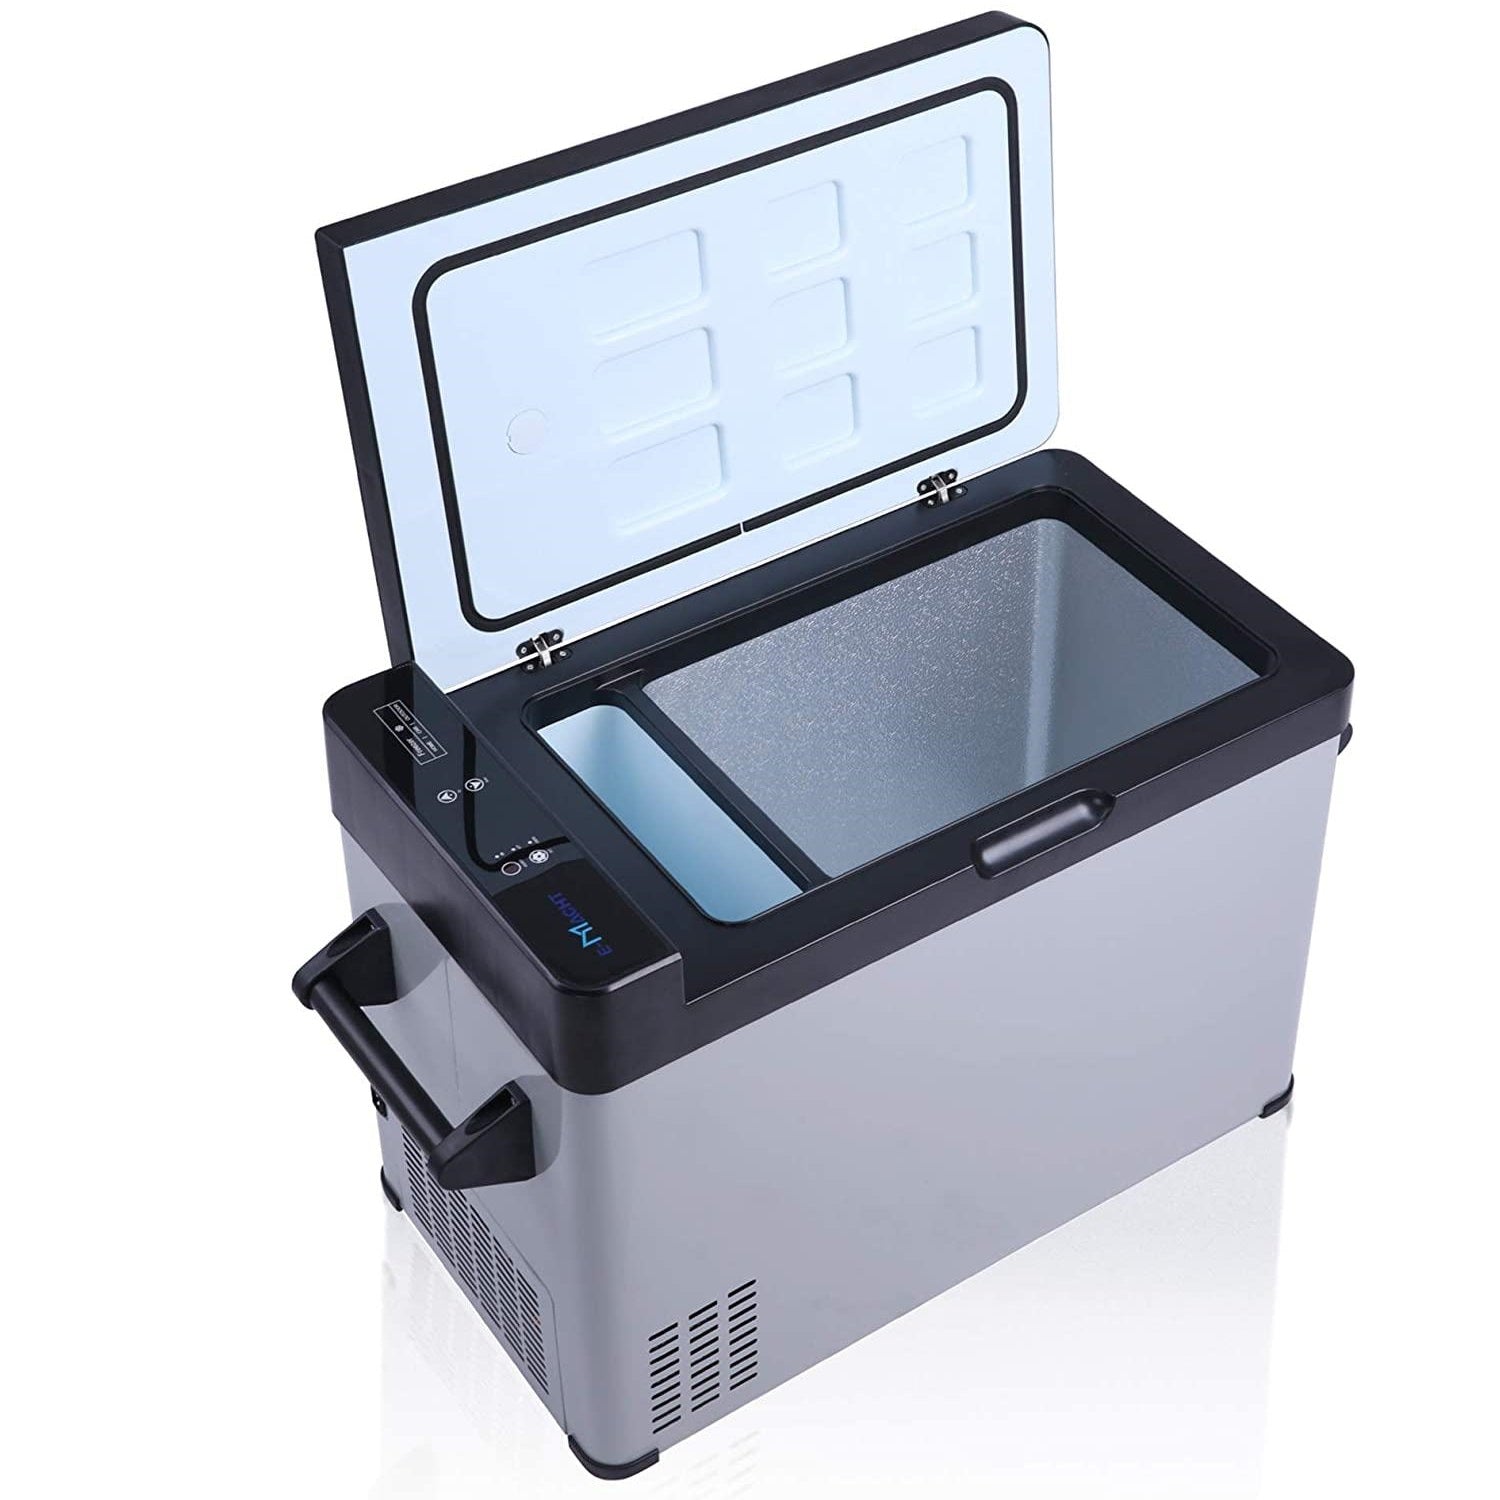 Mini Refriger for Car, DC12/24V, -7.6°F to 68°F, Car Refrigerator, Mini Freezer for Driving, Travel, Fishing, Outdoor or Home Use 52qt